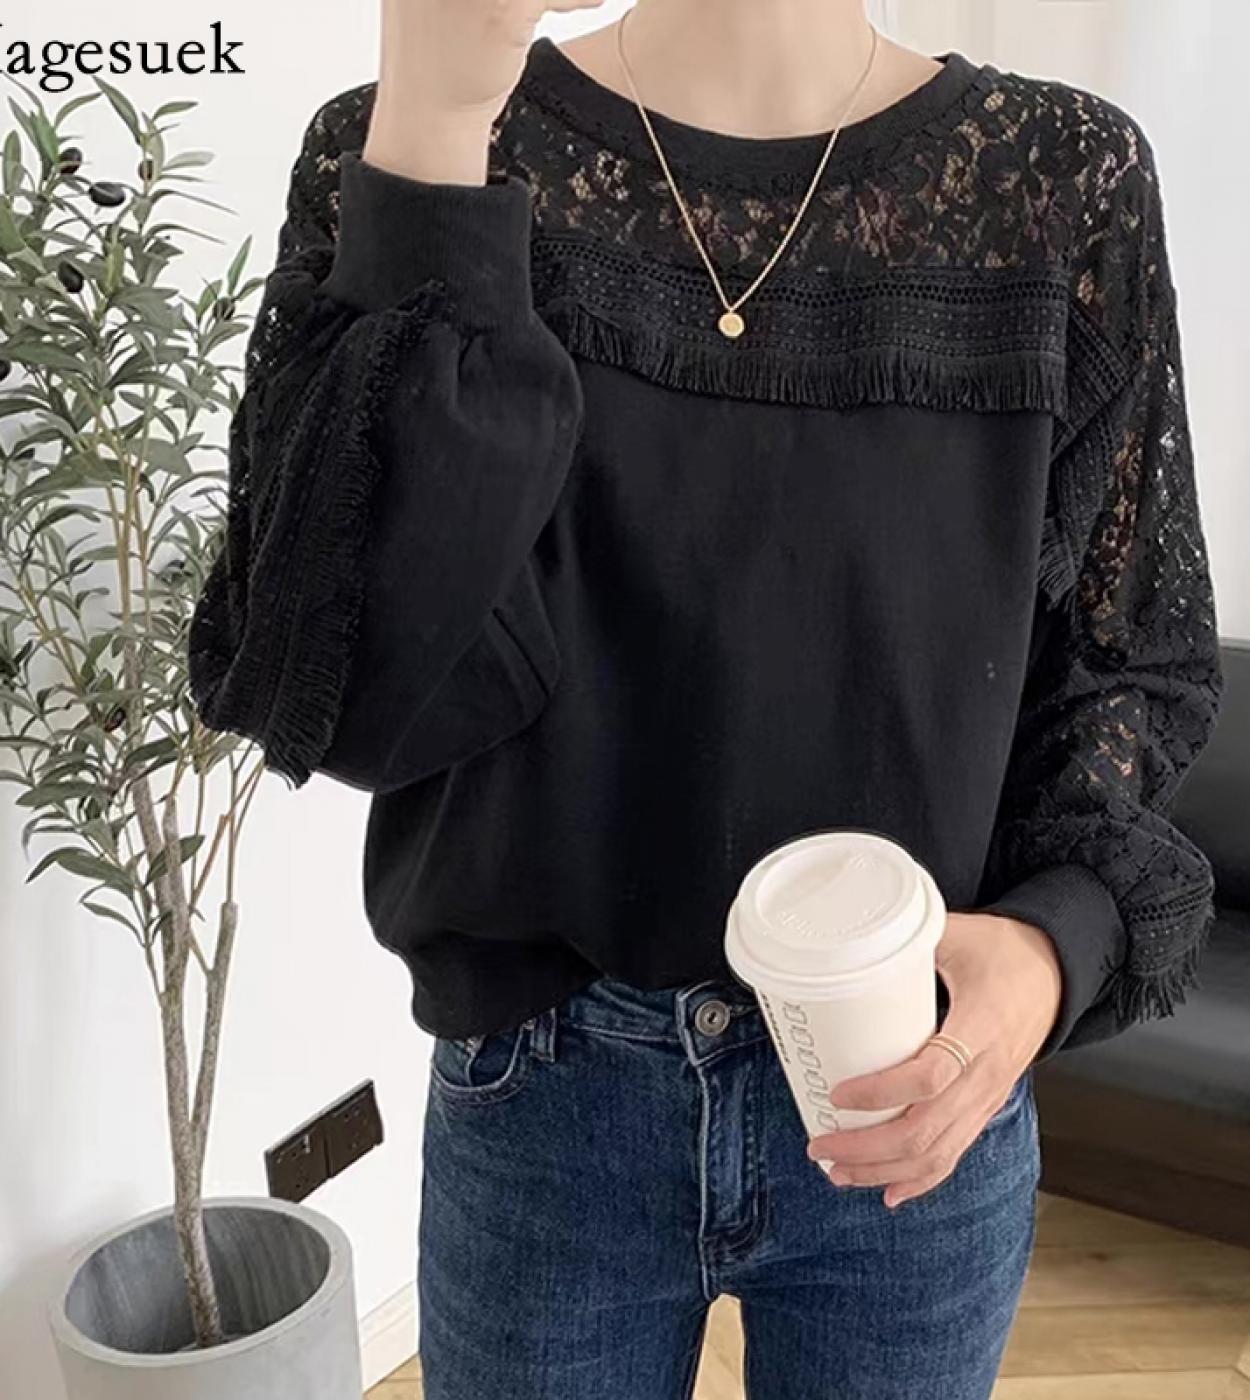 Hollow Embroidery Lace Stitching Blouse Women Long Sleeve Tshirt Autumn Vintage Oneck Shirt Loose Elegant Top Blusas 169